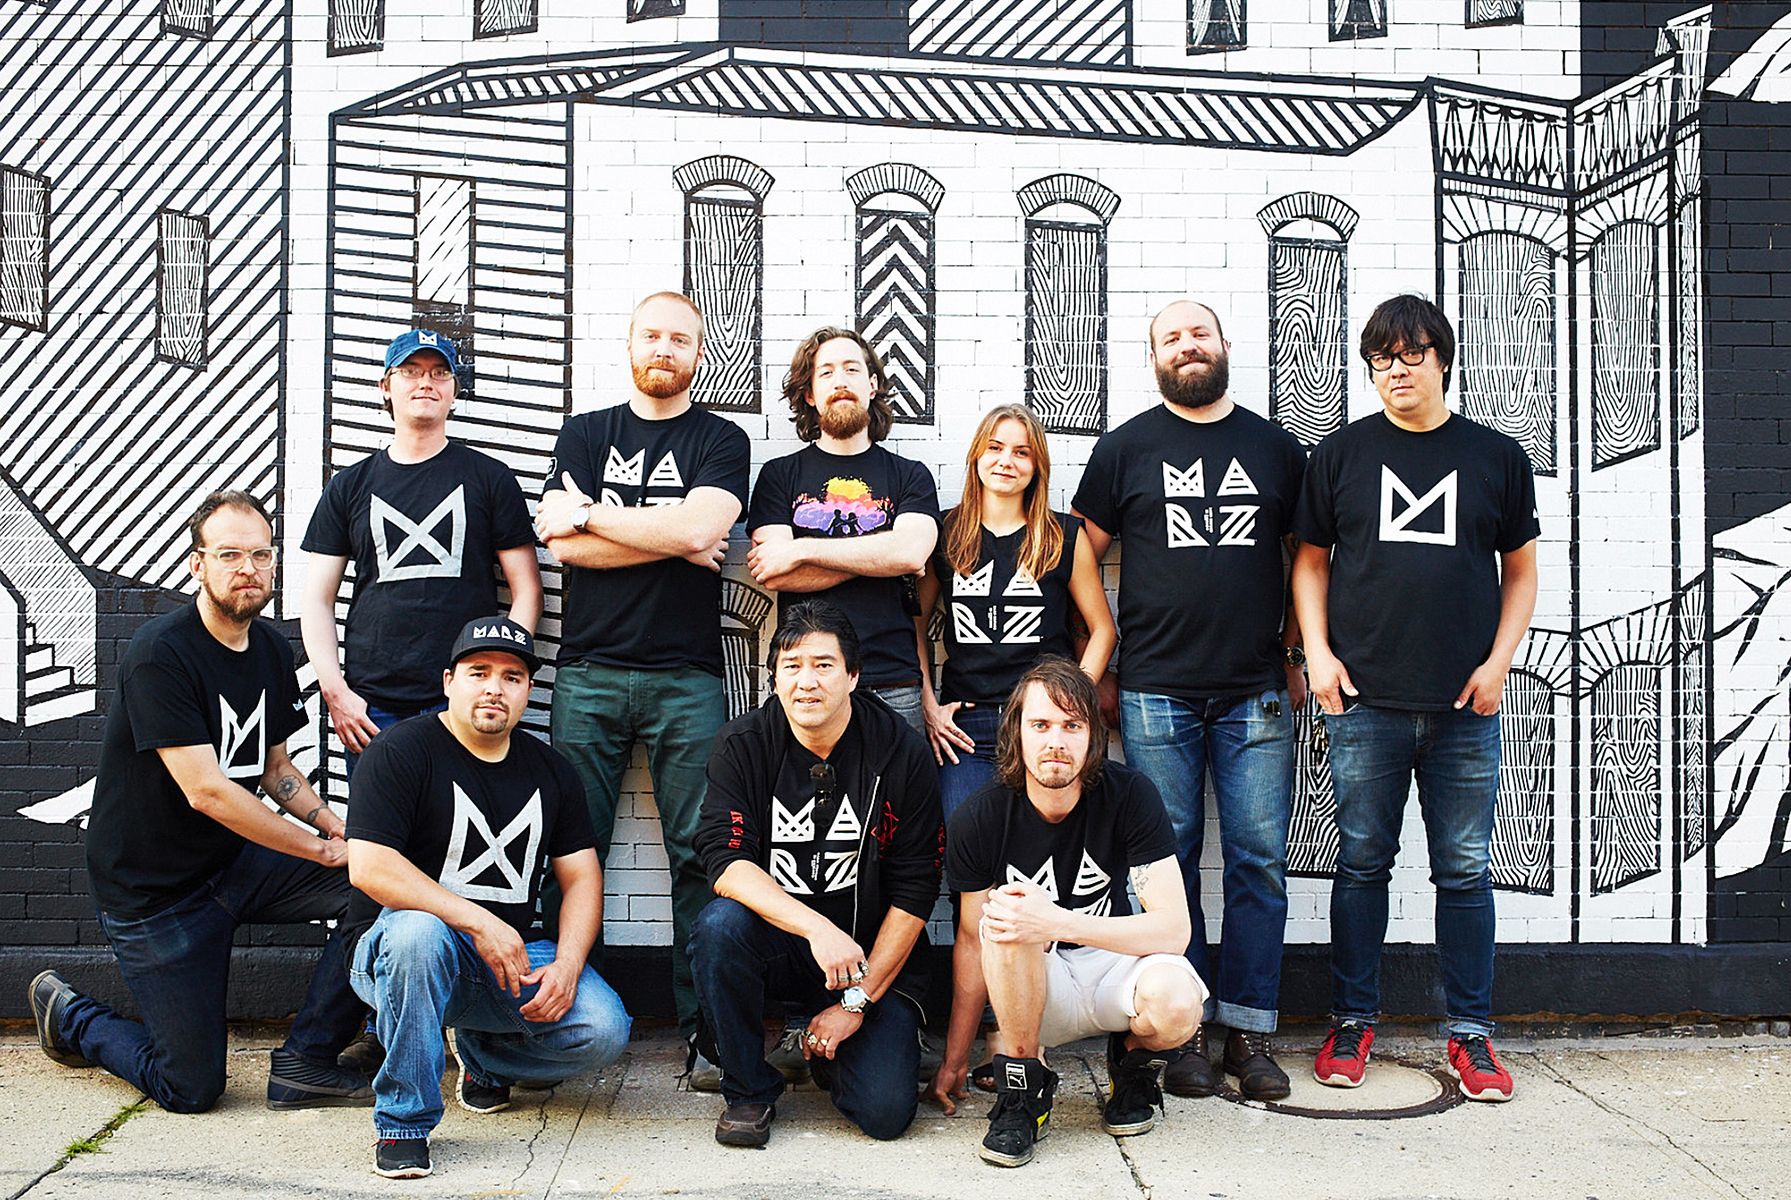 The Marz Community Brewing Company team, getting down with their shirts, swag and party faces. Come say hello!